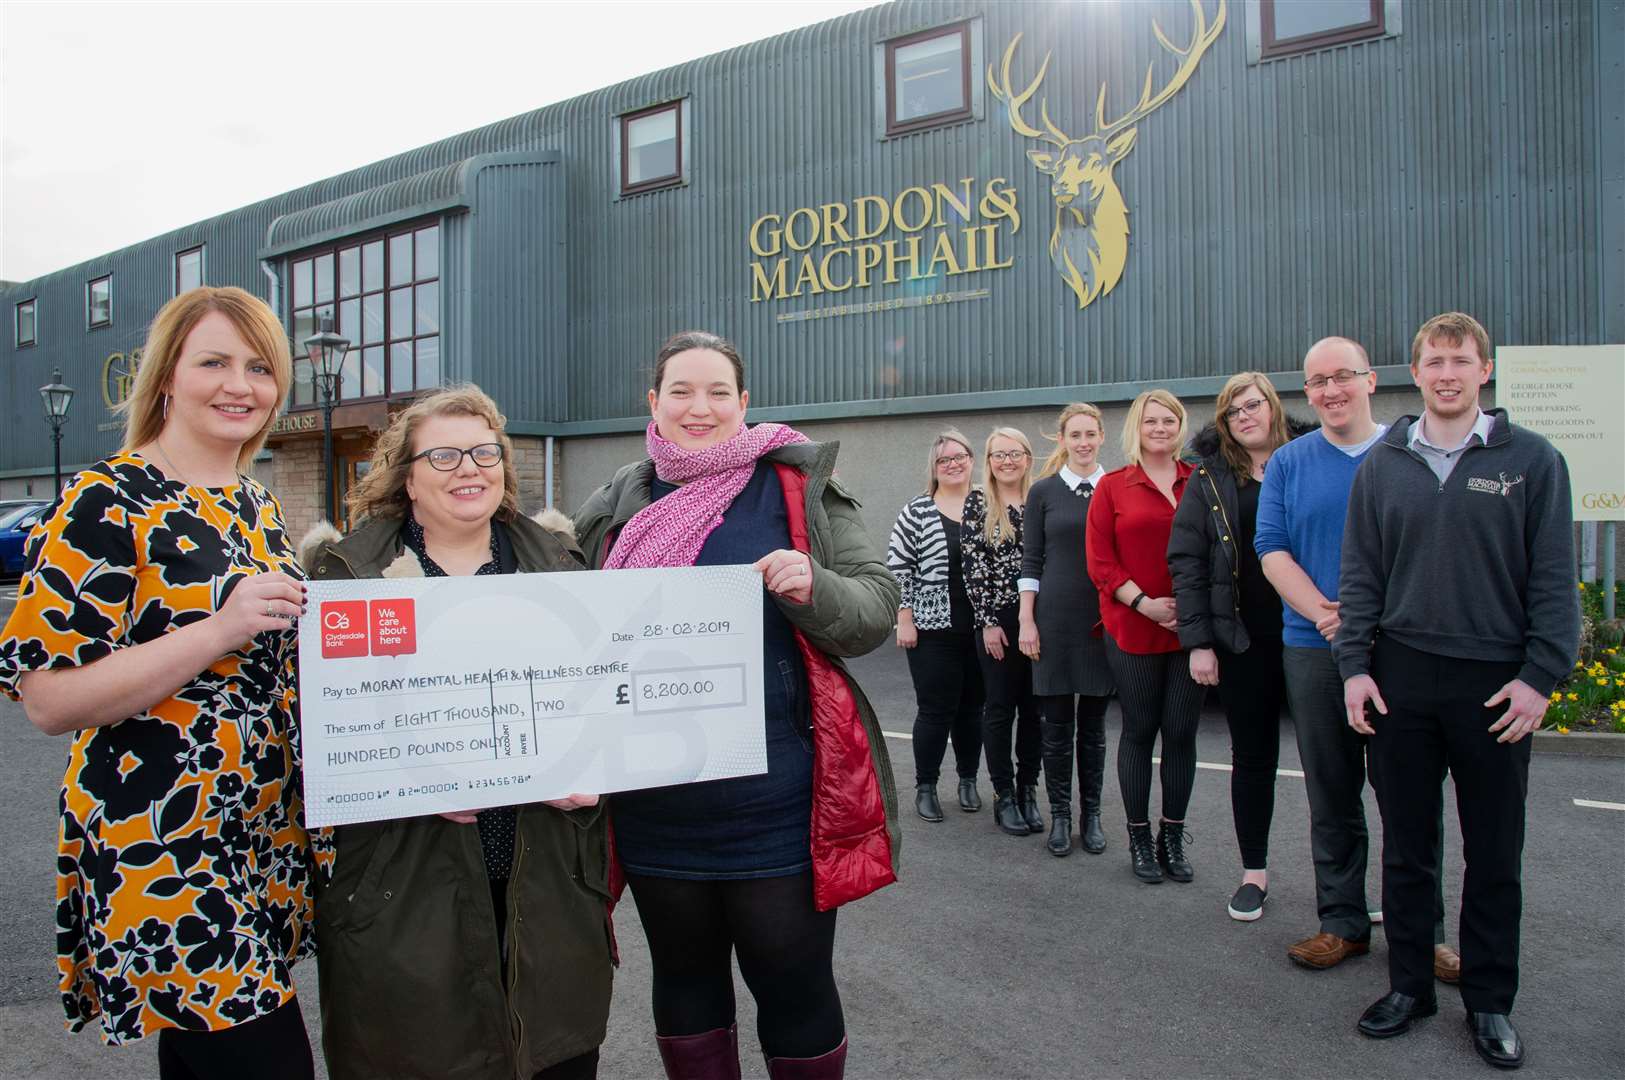 Jodie Clayton (left), HR administrator at Gordon and MacPhail, is joined by fellow colleagues to present £8200 to Karen Dunnett (centre) and Louise Parkinson of the Moray Mental Health & Wellness Centre.